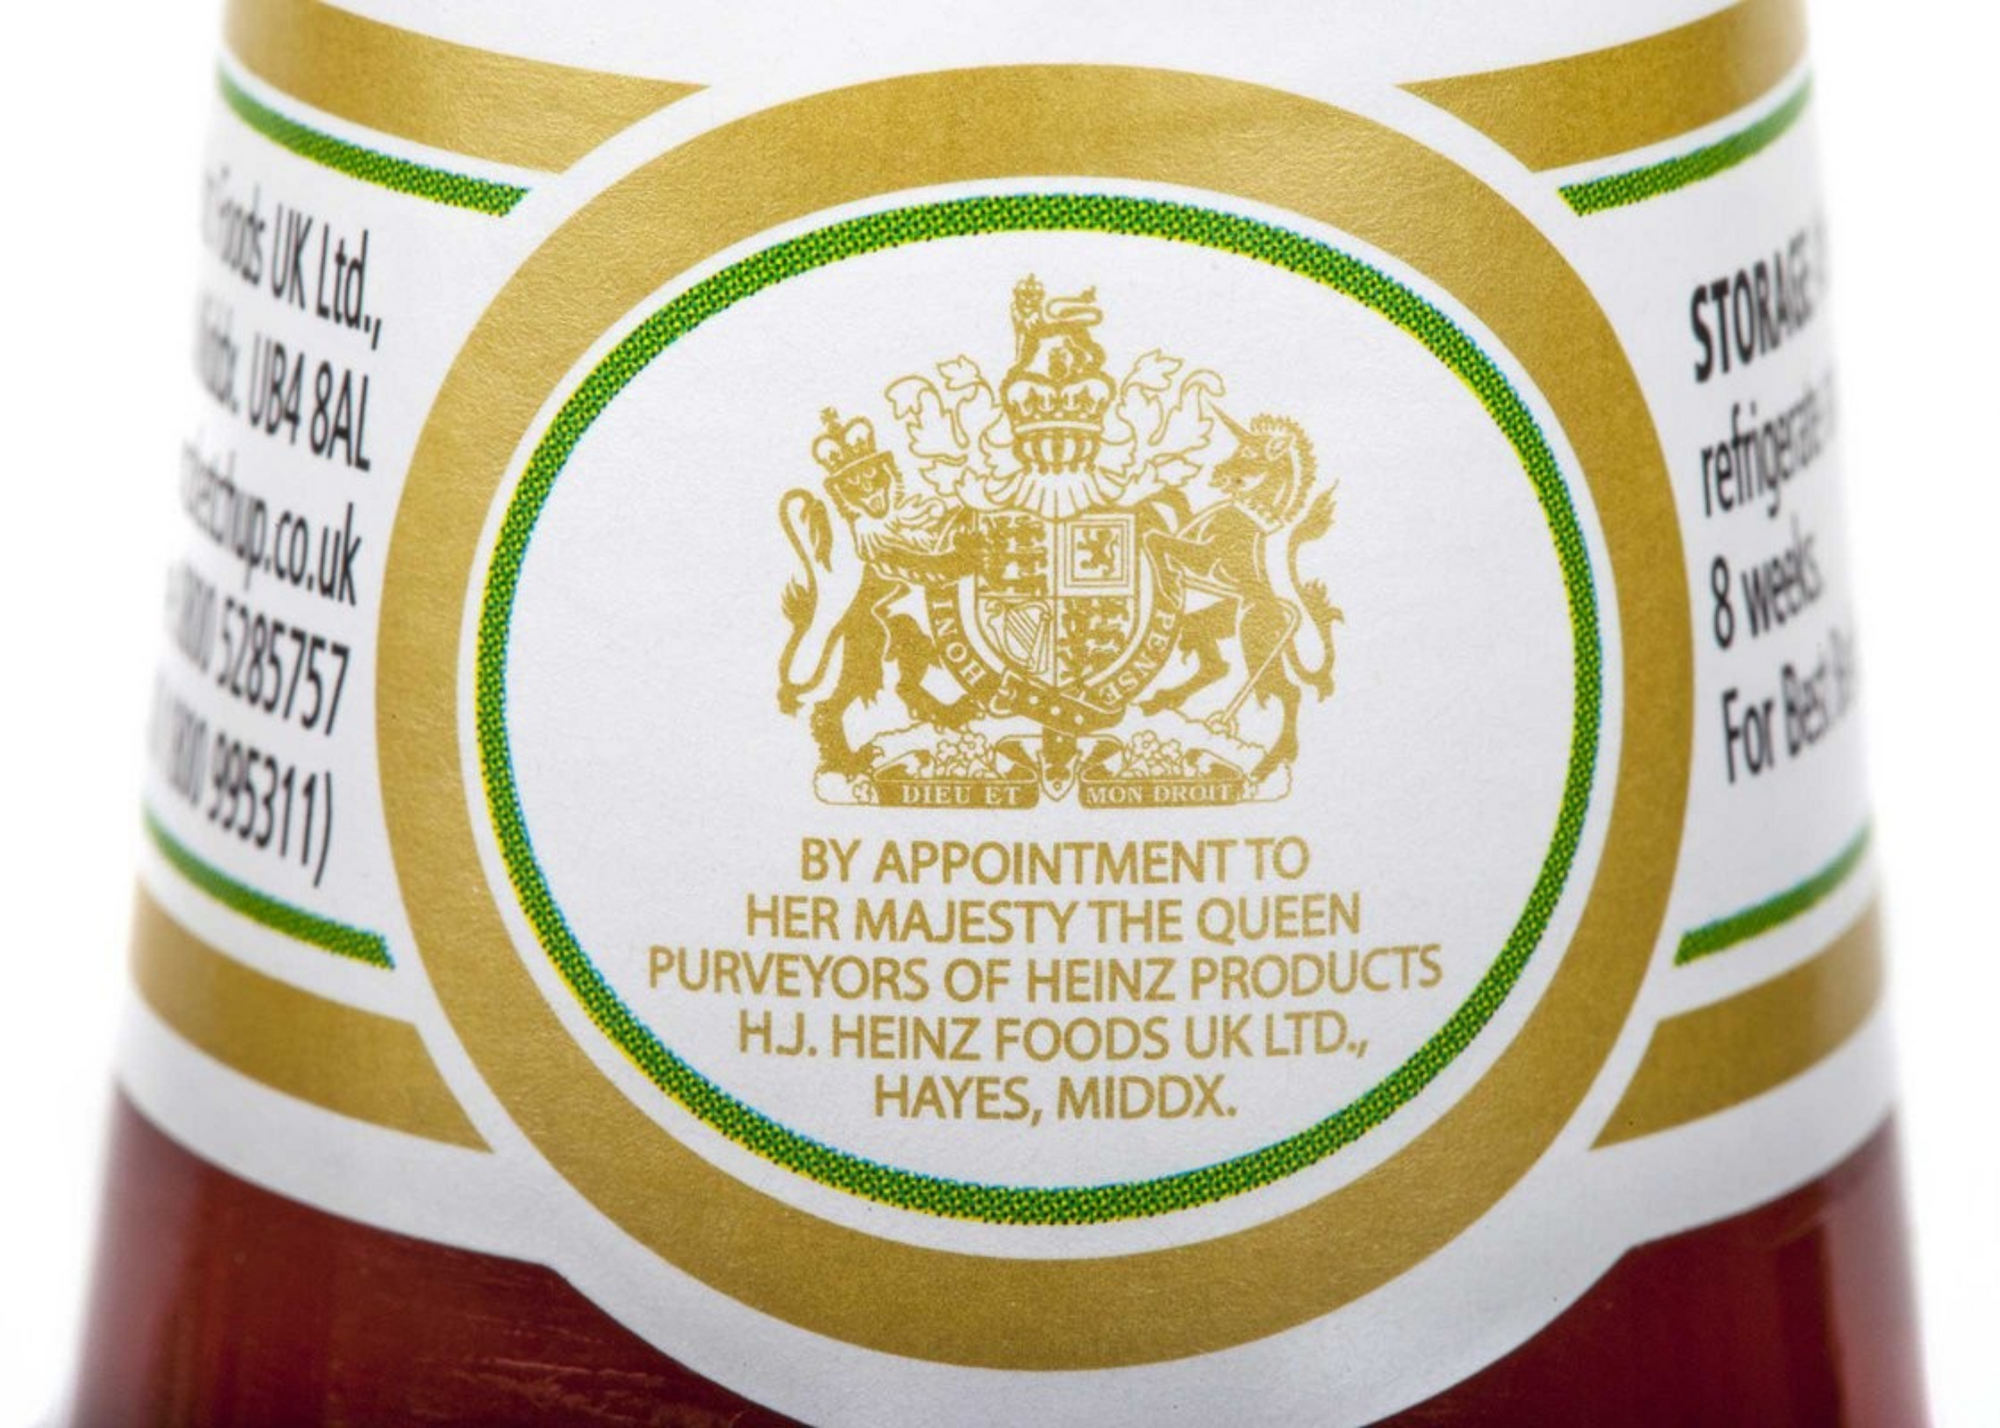 Heinz Ketchup showing a royal warrant seal on top of the bottle